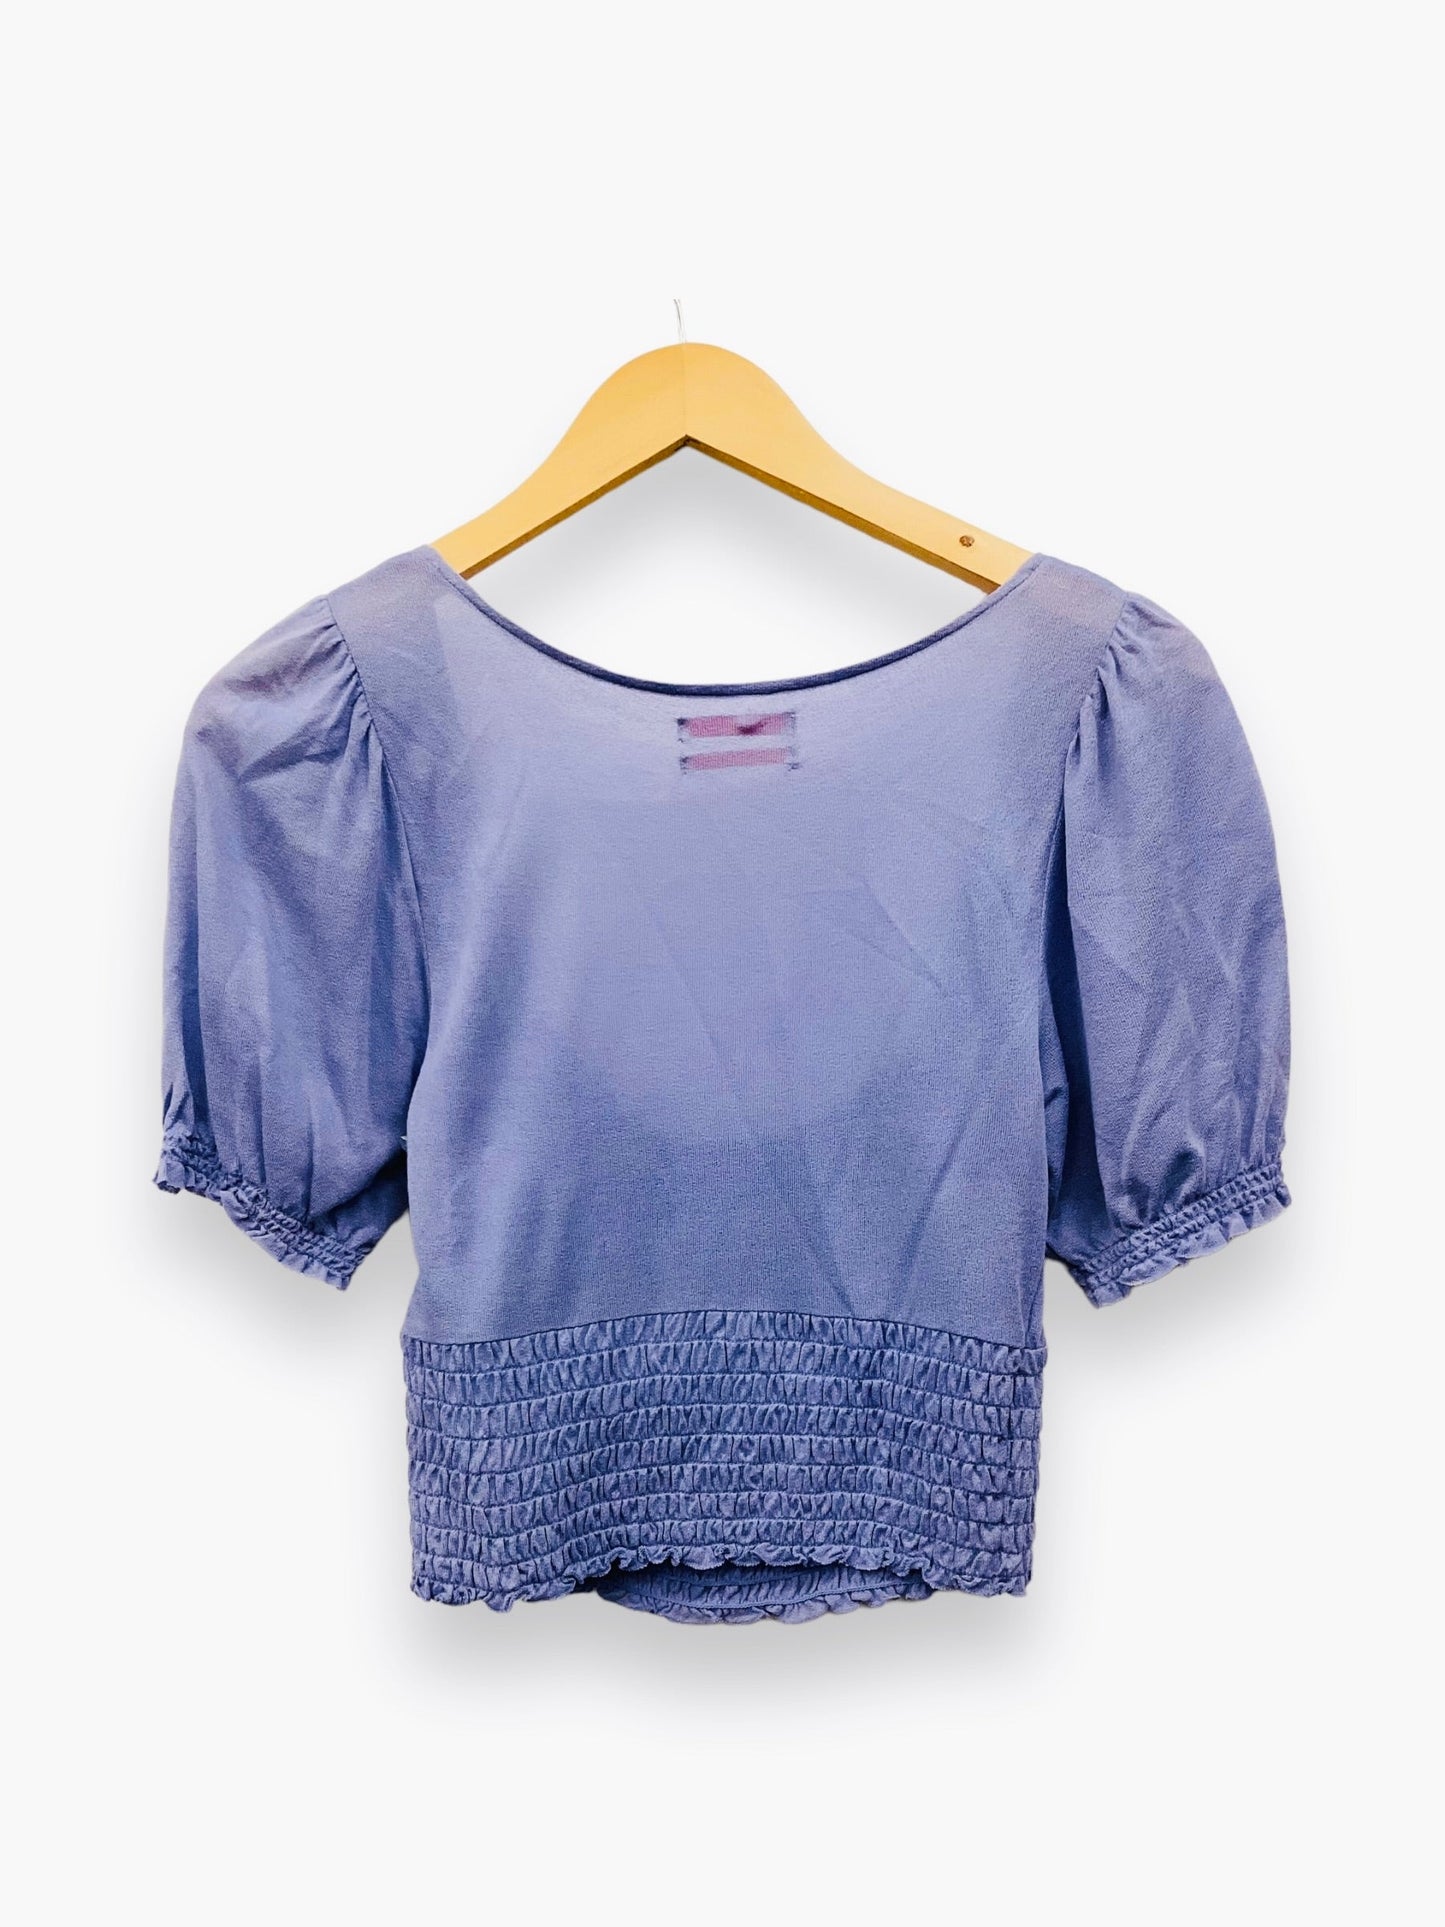 Purple Top Short Sleeve Urban Outfitters, Size M